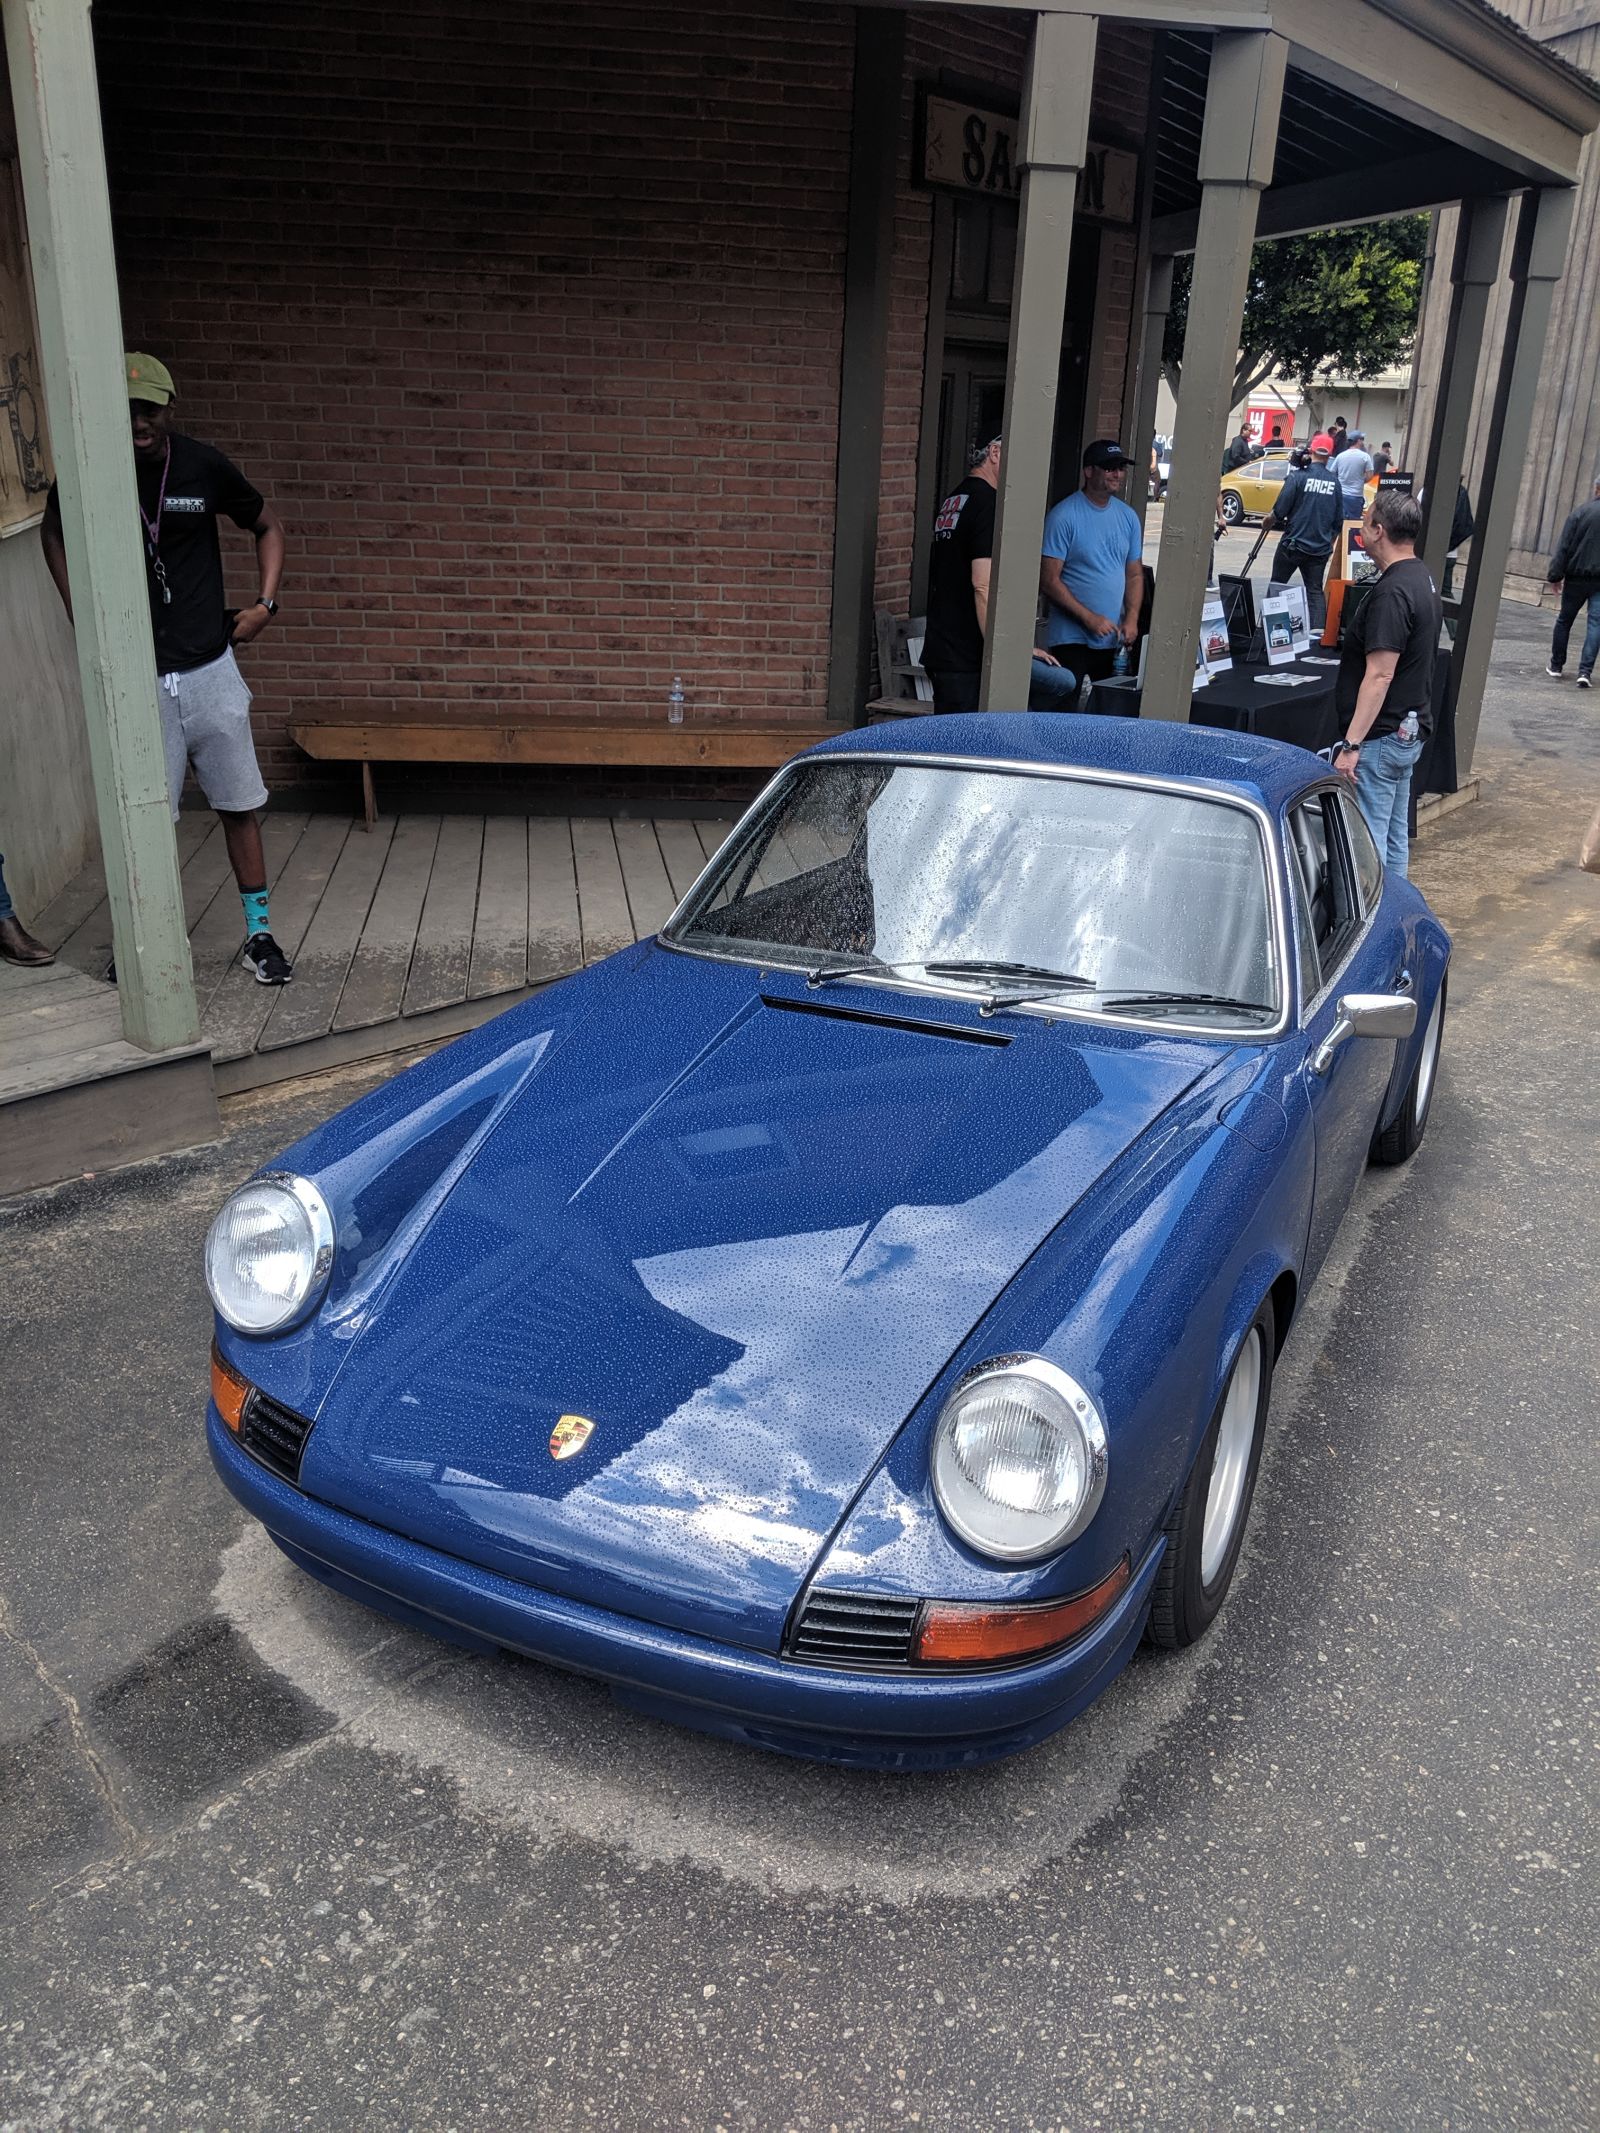 Kris Clewell’s well-traveled ‘72 911, driven out and back from Minnesota. Take the car!